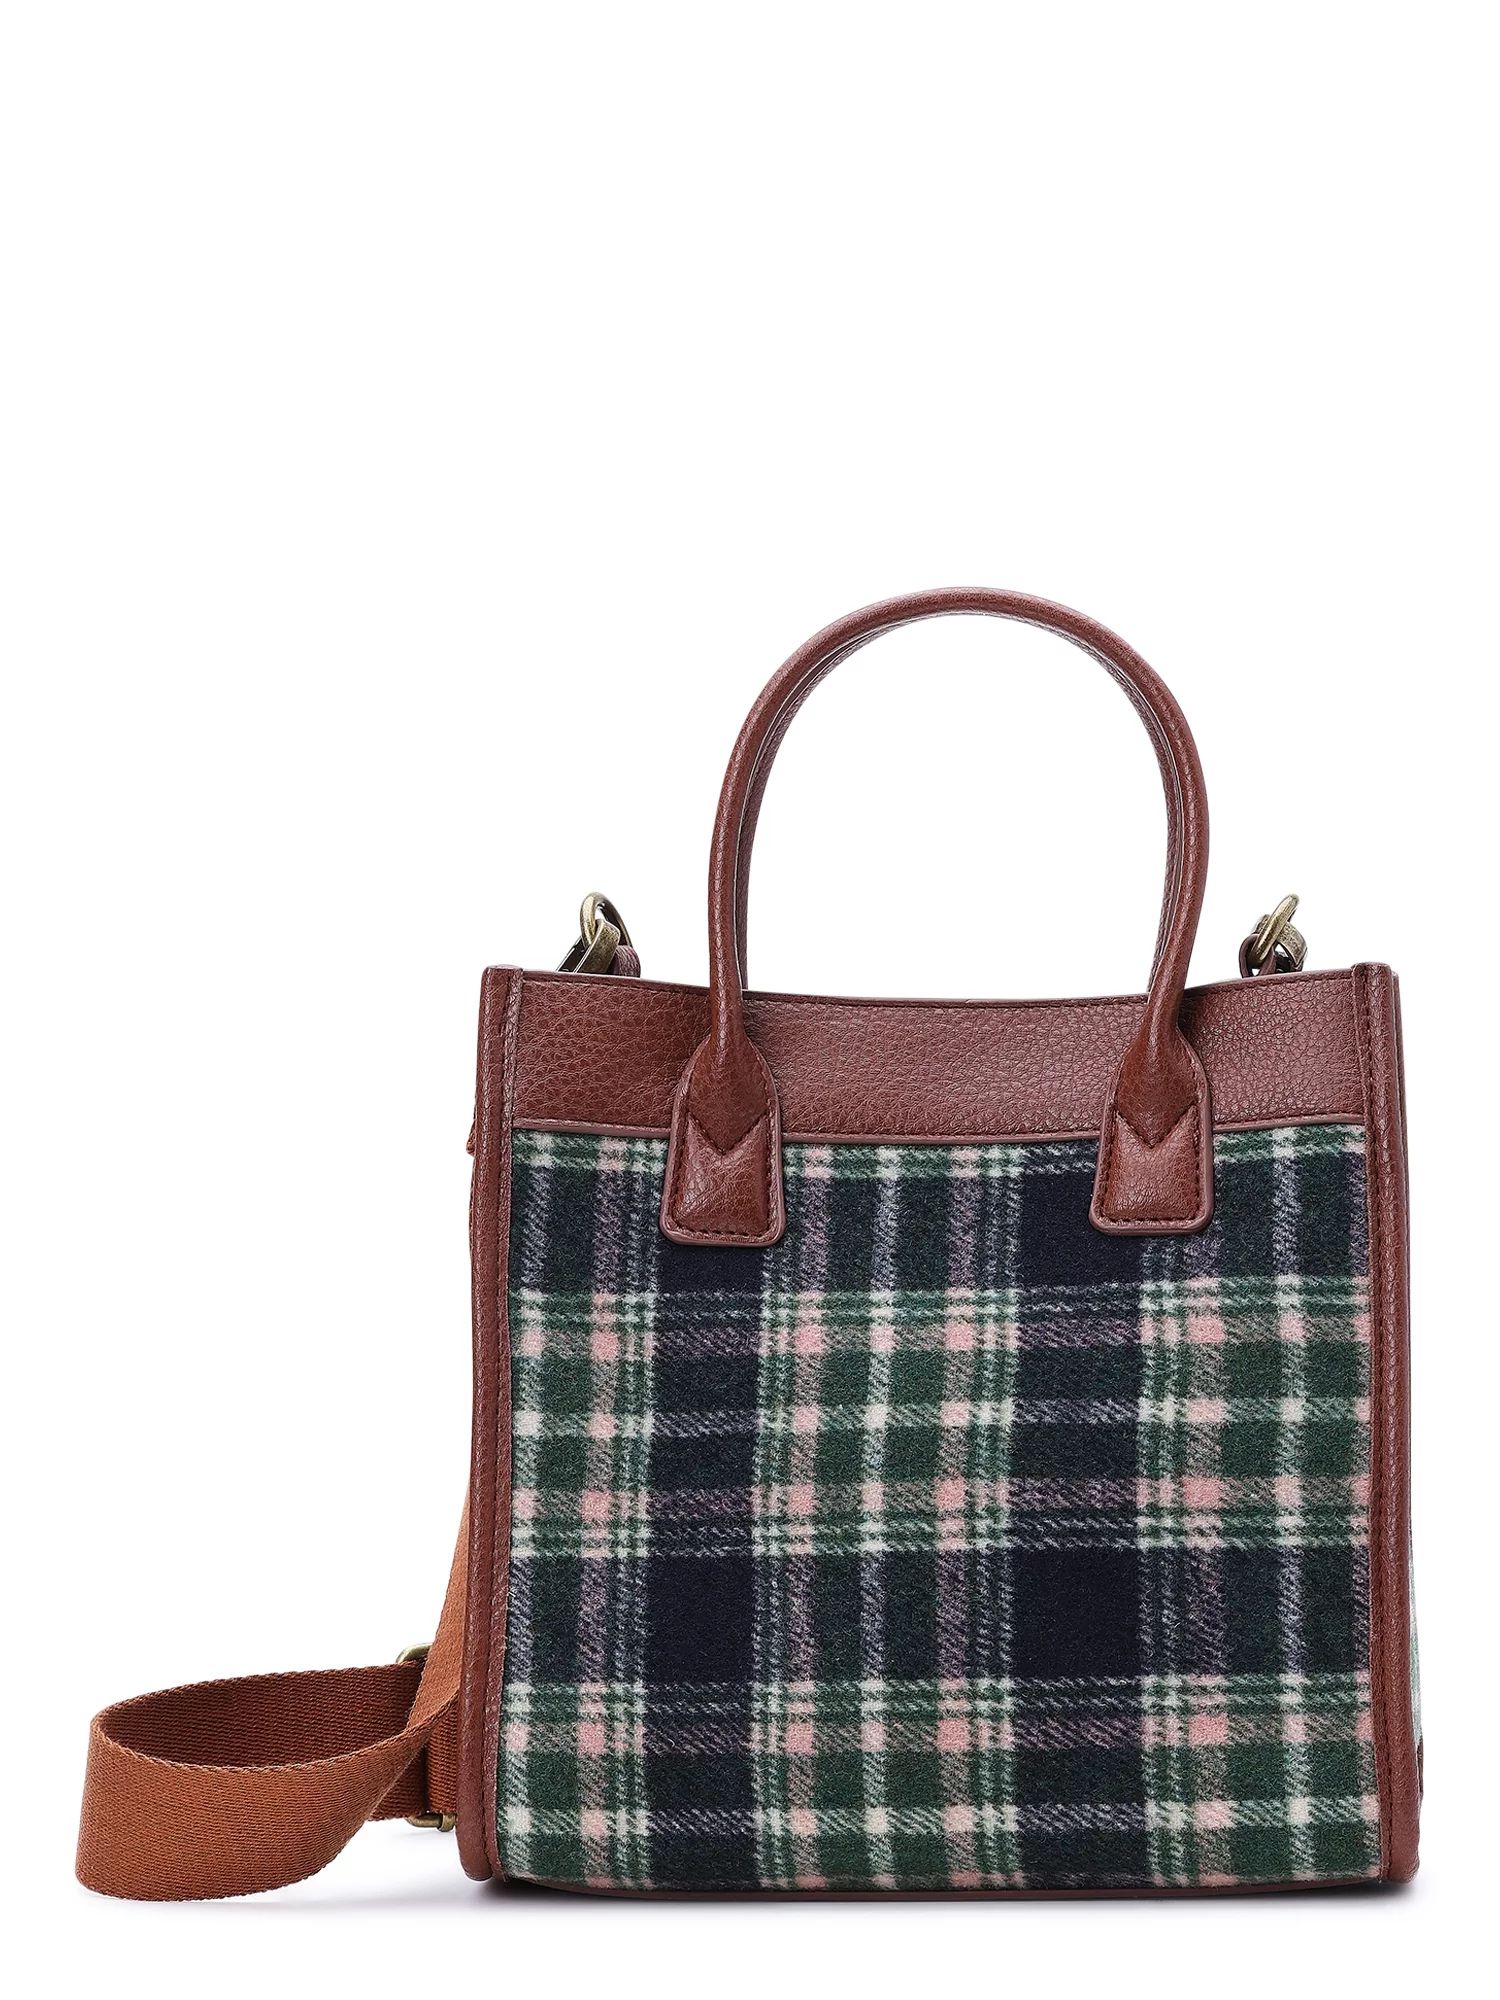 Time and Tru Women's Houndstooth Tote Bag